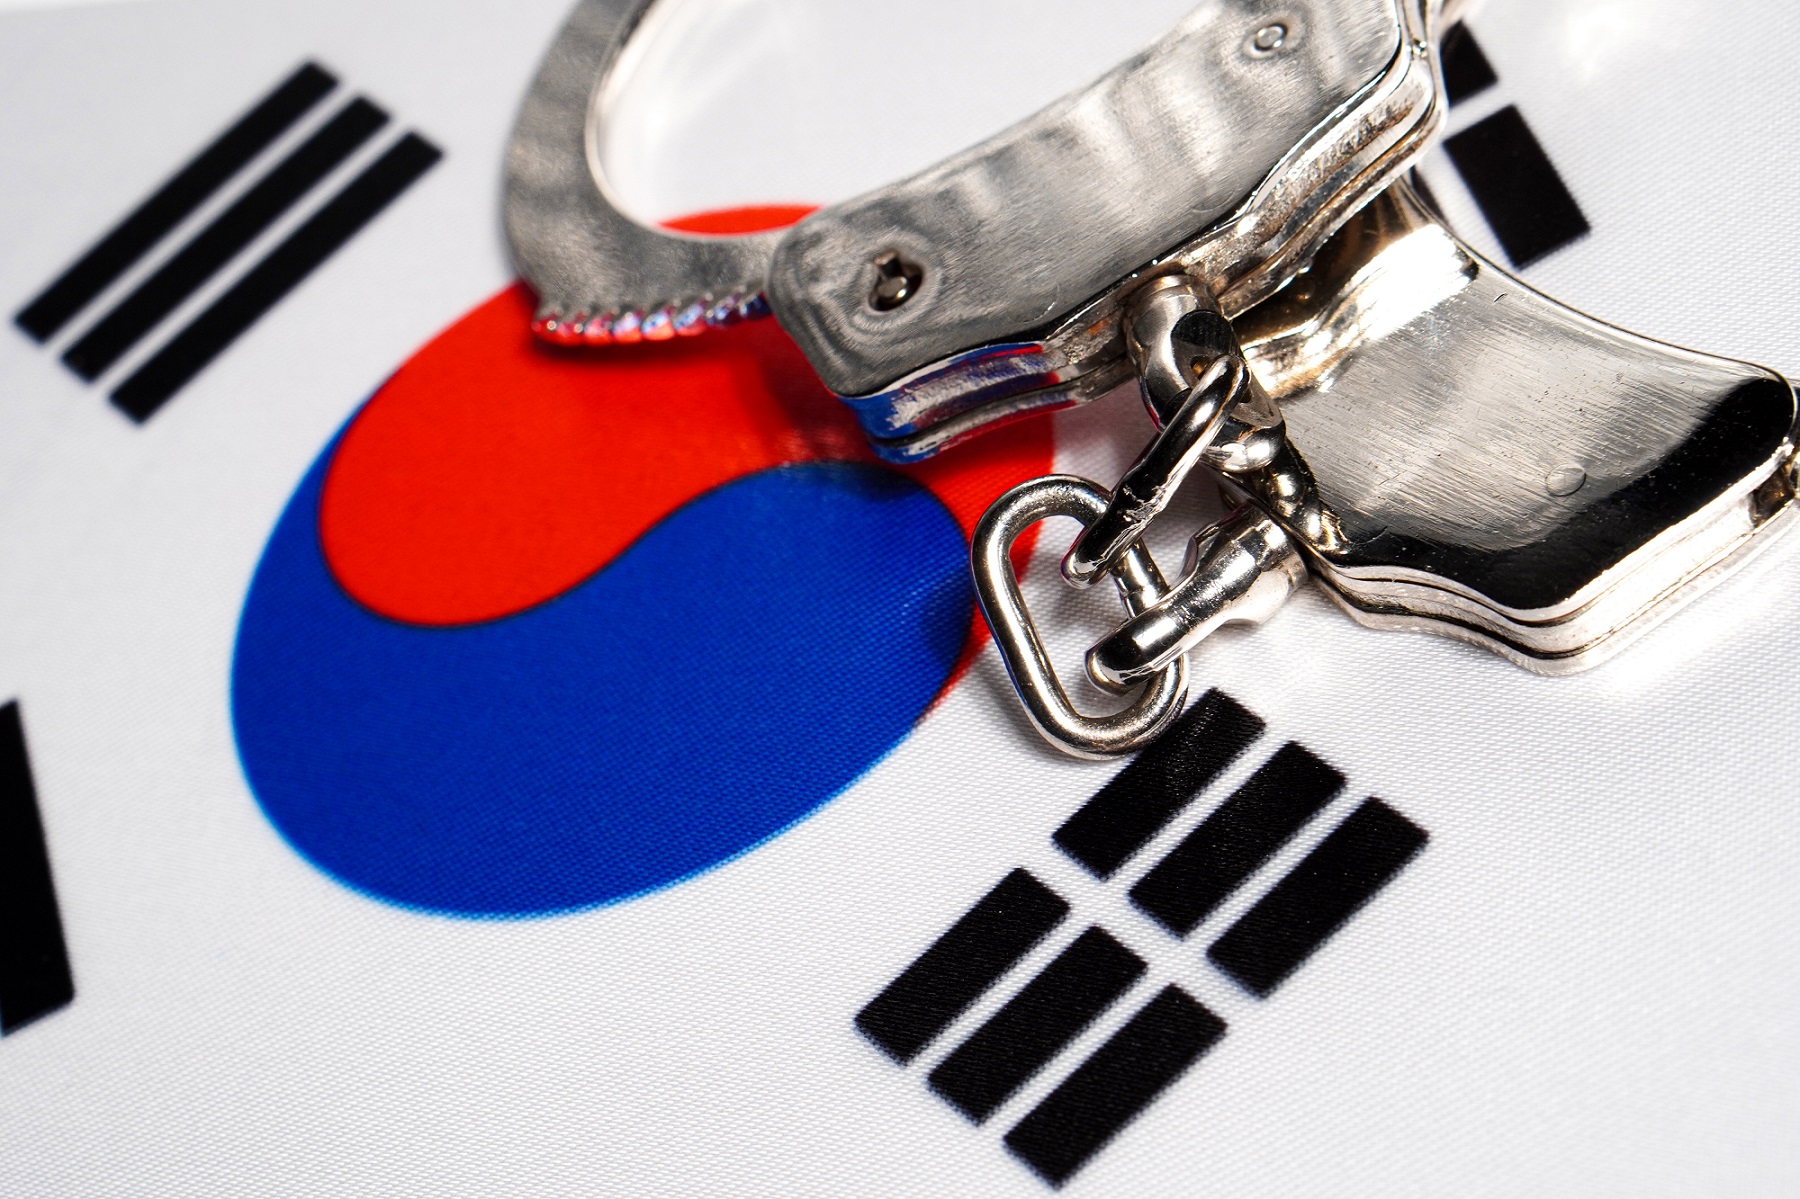 A set of handcuffs rest on a representation of the flag of South Korea.